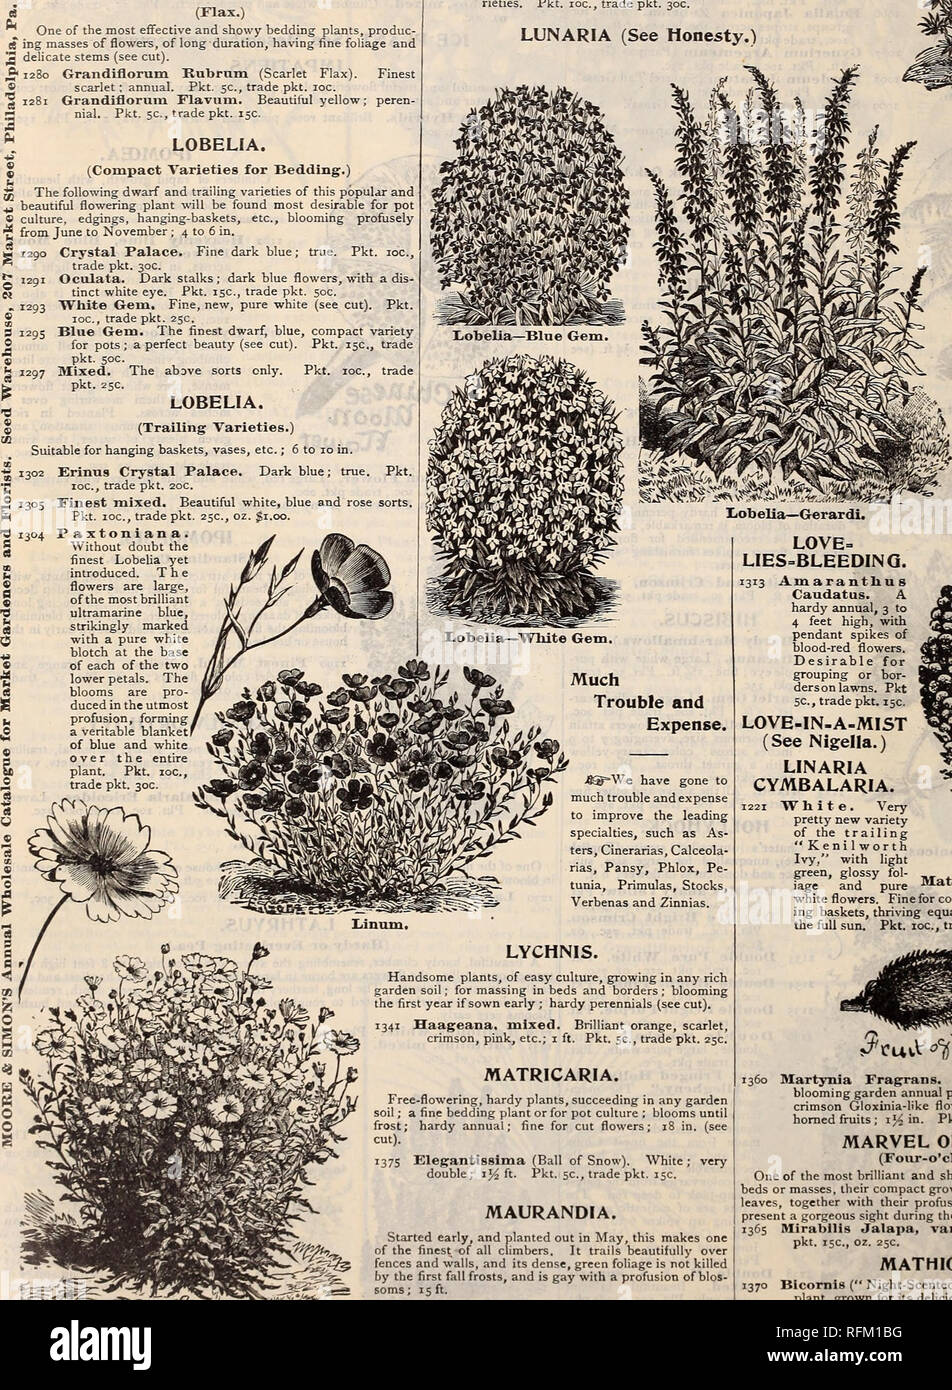 . Key to profit in the garden. Nursery stock Pennsylvania Philadelphia Catalogs; Vegetables Seeds Catalogs; Flowers Seeds Catalogs; Agricultural implements Catalogs. LAYIA. A pretty and attractive little hardy annual that ought to be generally grown for cut-flower purposes. The head is as broad as that of a Marguerite, but much wider. A bed or mass of this annual produces a fine effect, owing to the large quantity of bloom produced; 15 in. 1260 Elegans, mixed. White and yellow. Pkt. 5c, trade pkt. 15c. LAVENDER. 1265 Fragrans. An ornamental hardy perennial, bearing long spikes of fragrant blue Stock Photo